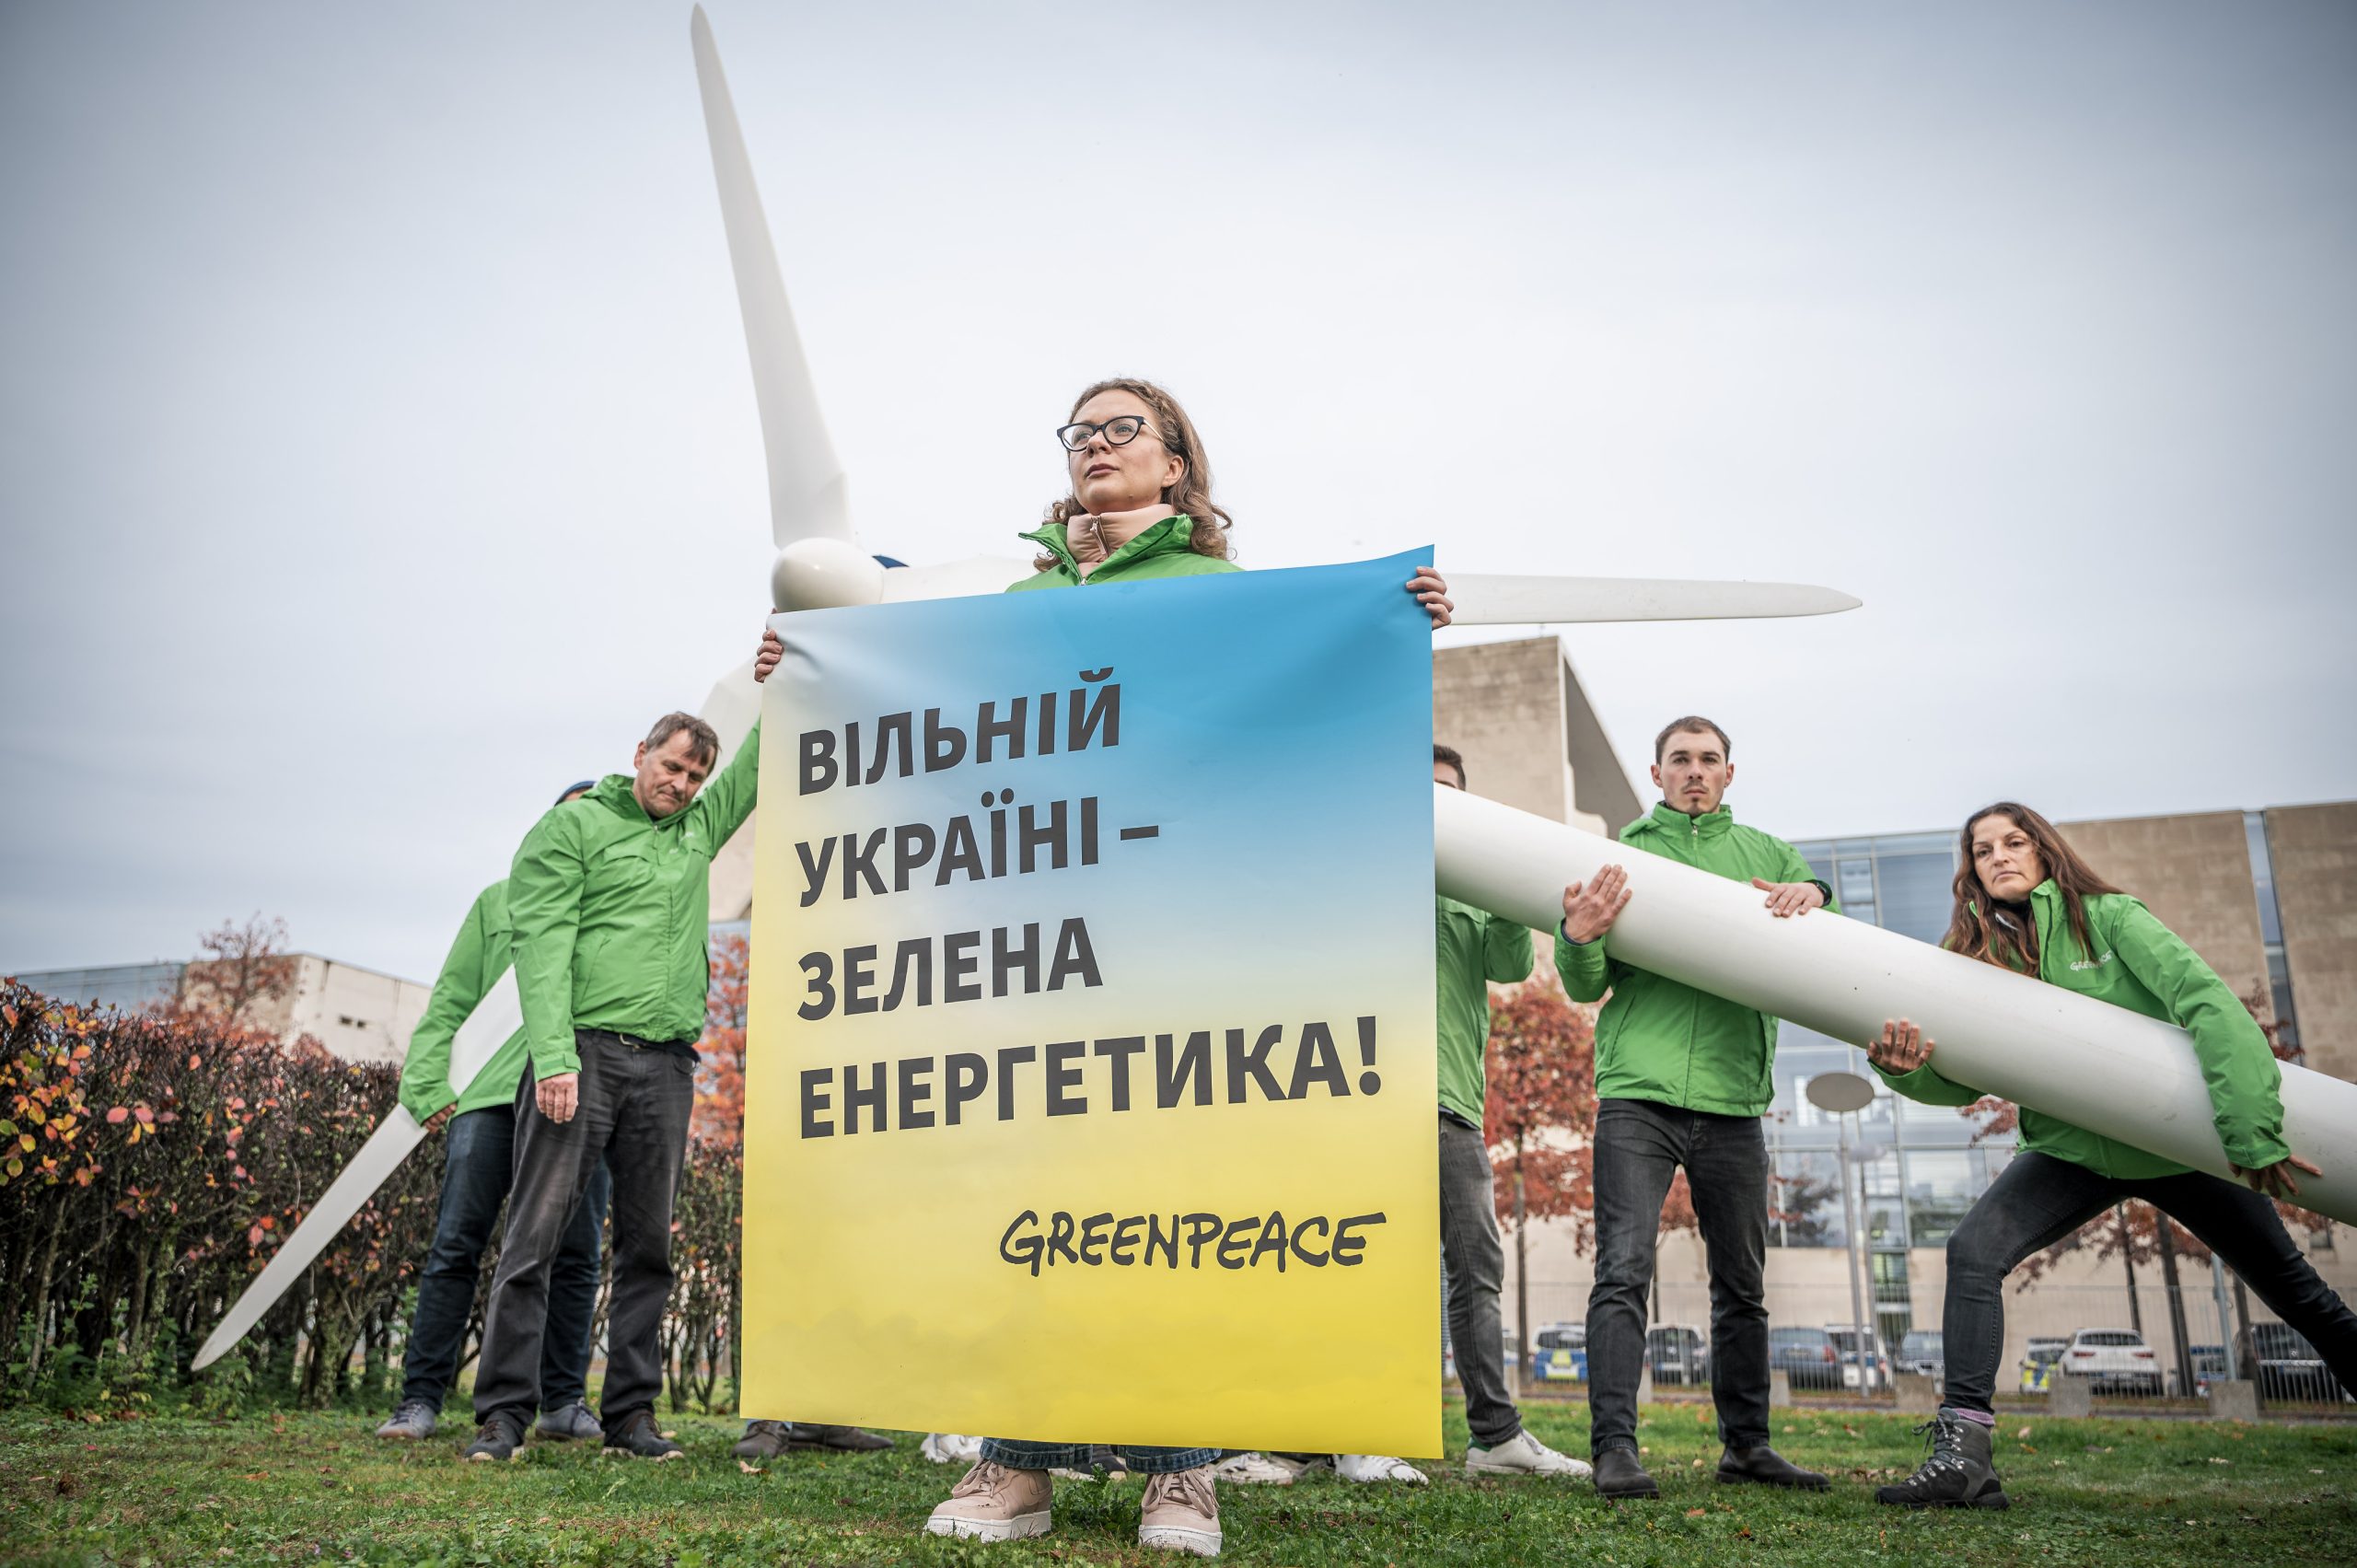 Under the topic: "A free Ukraine needs renewable energy", Ukrainian and Greenpeace activists are making a joint statement. The activists symbolically set up a wind turbine in front of the German Bundestag in Berlin. A banner is displayed that reads in Ukrainian and English: Free Ukraine Needs Green Energy.